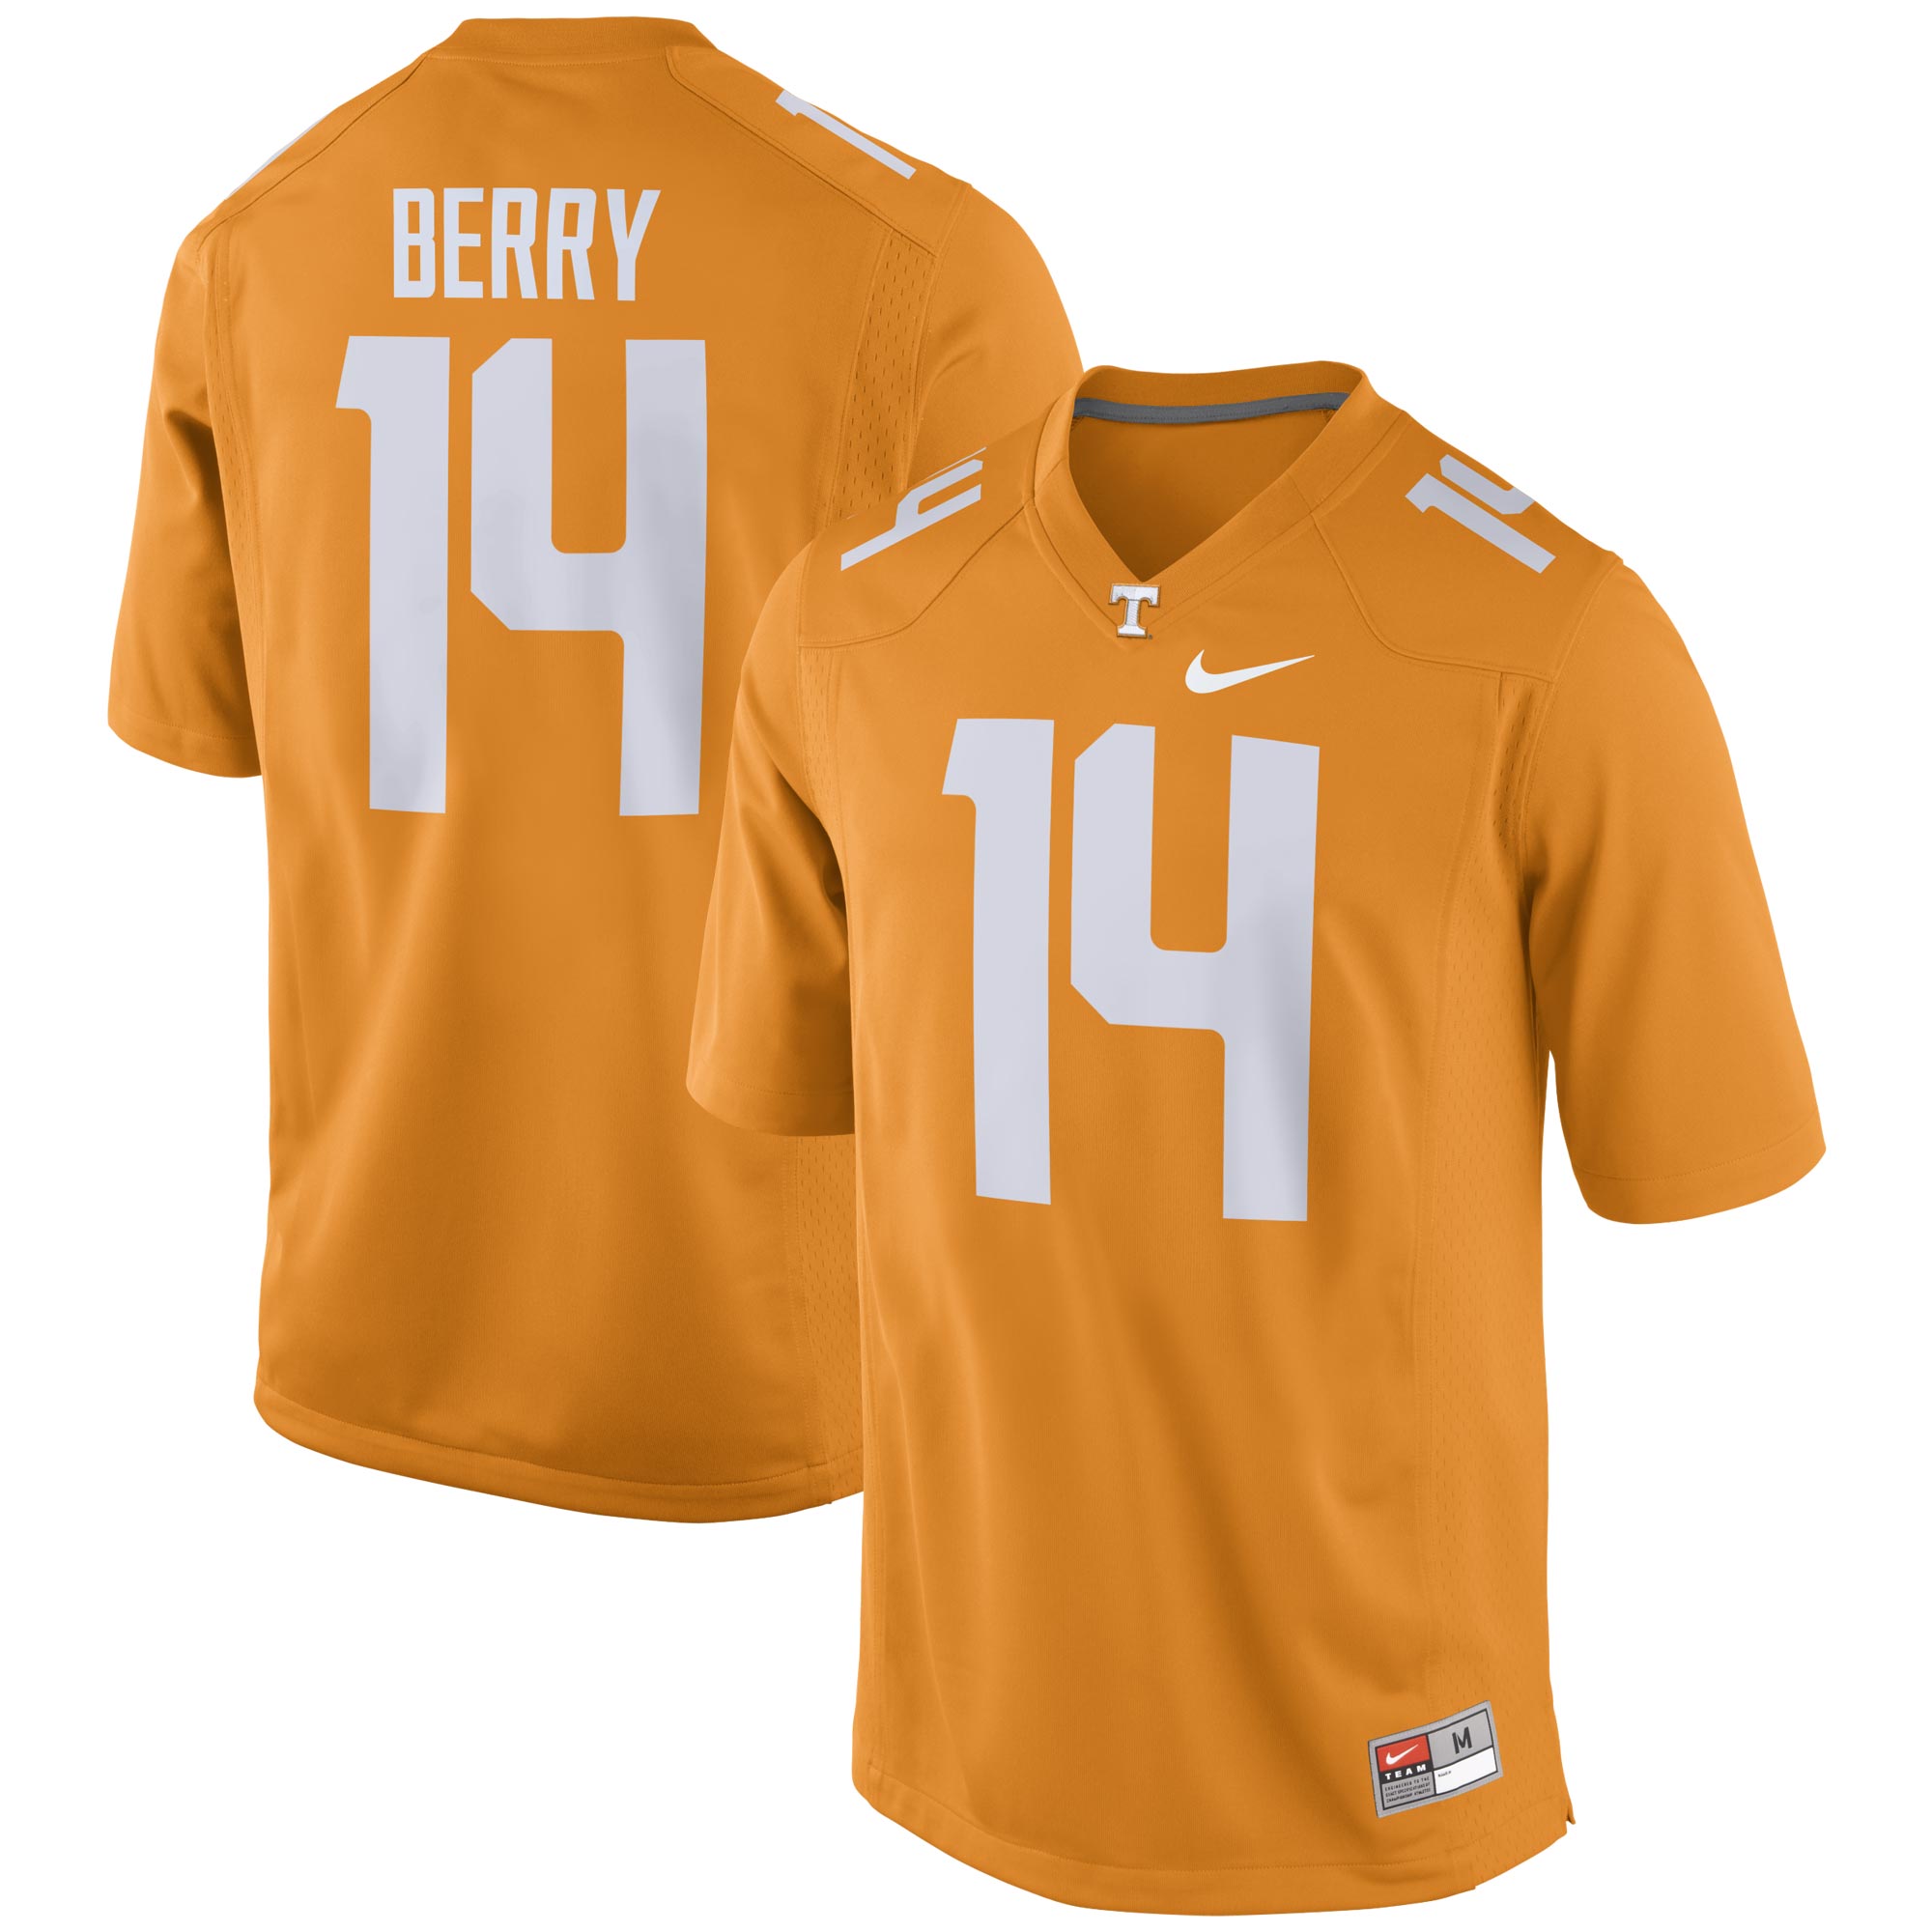 Eric Berry Tennessee Volunteers Alumni  Football Shirts Jersey - Tennessee Orange For Youth Women Men